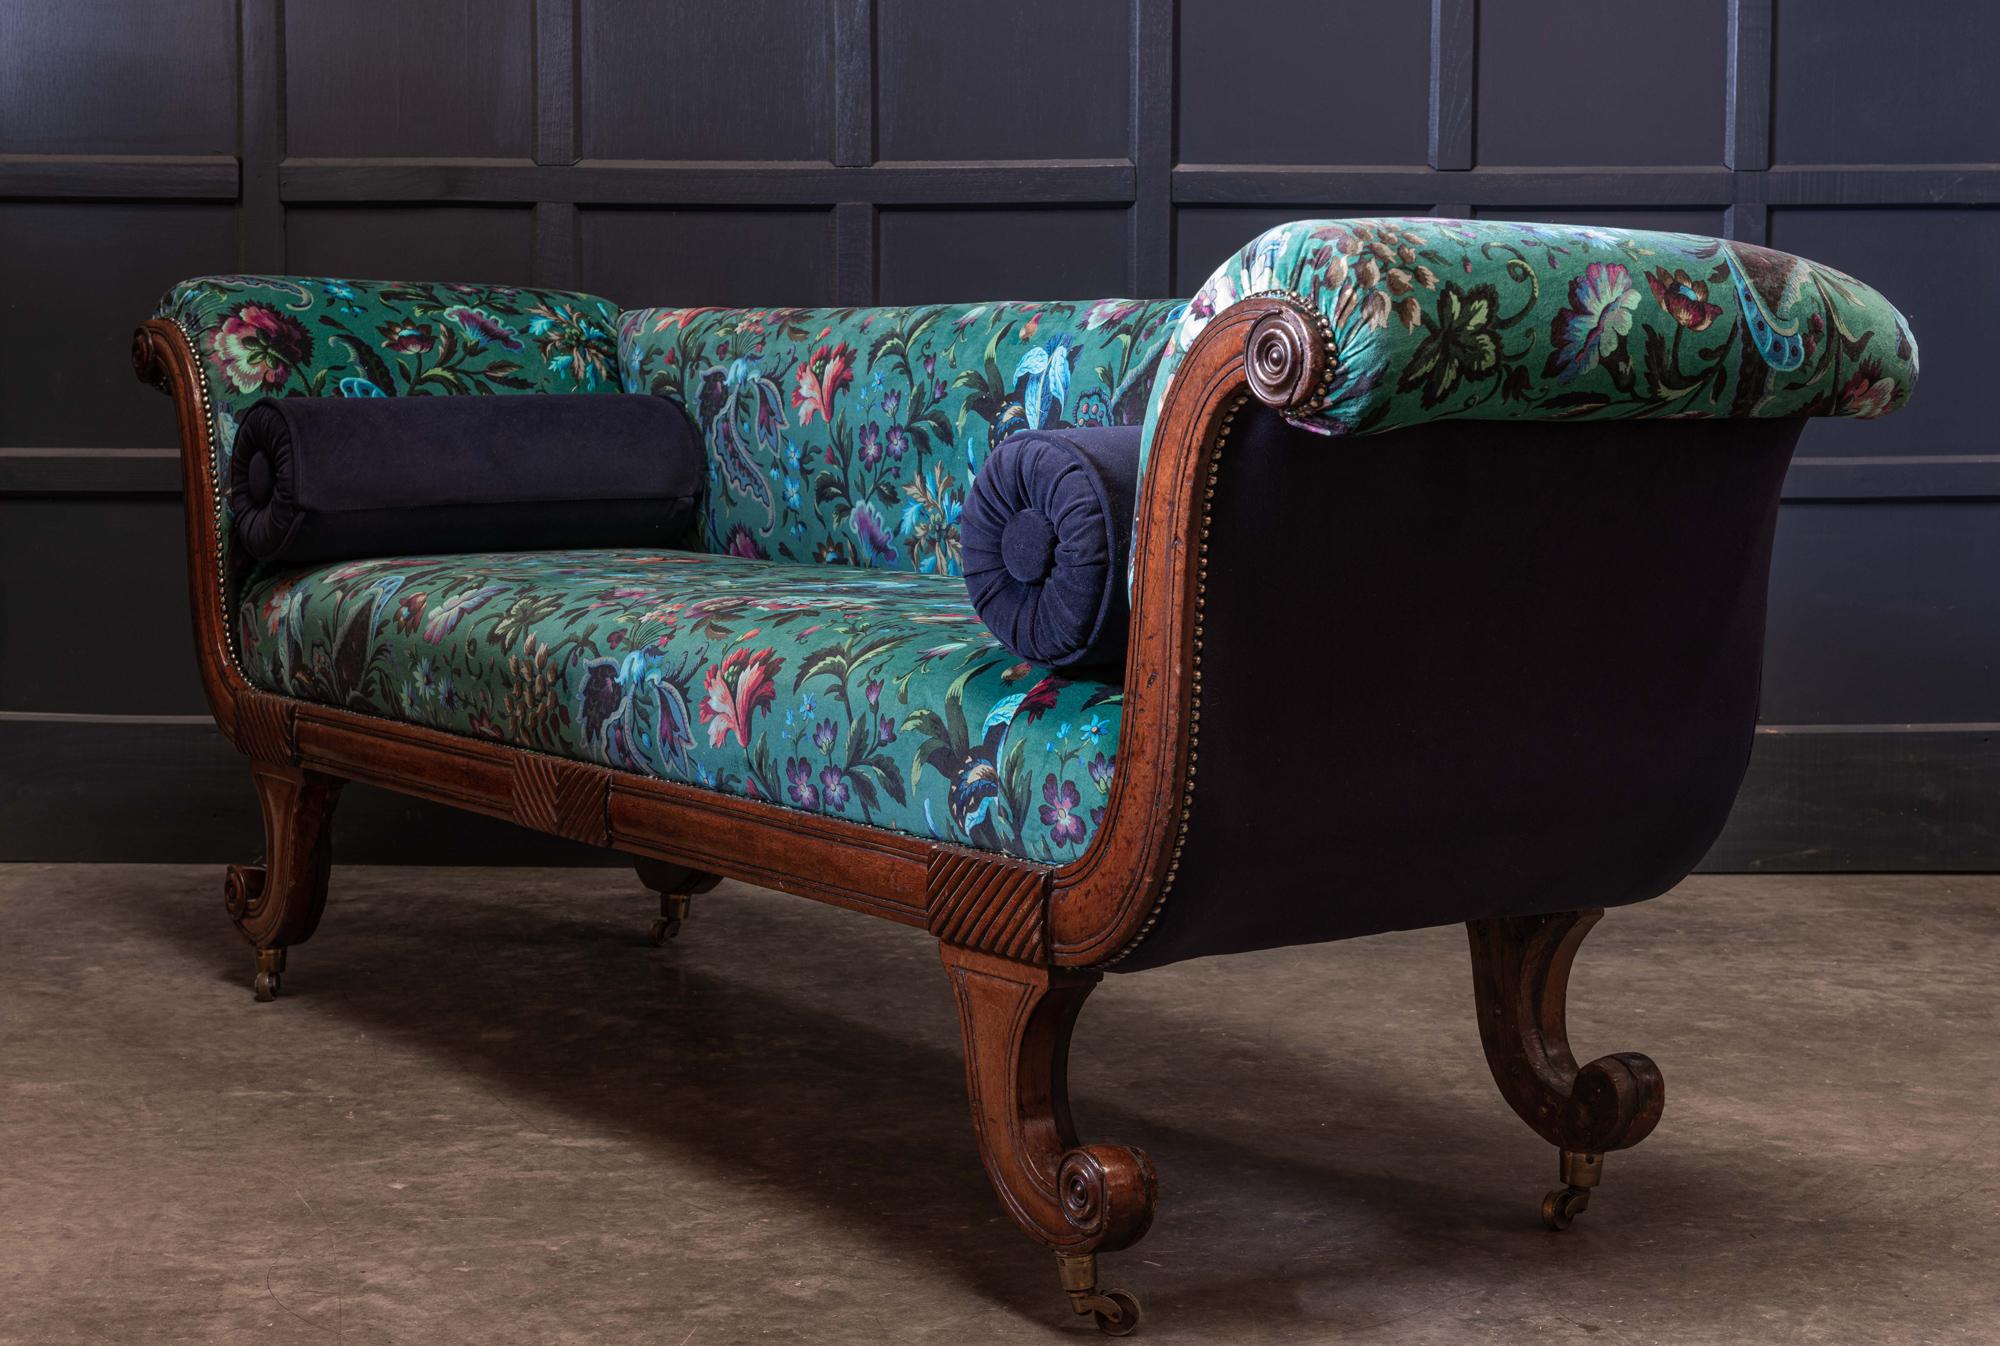 English 19th century Regency mahogany scroll end sofa, reupholstered.
circa 1820.

Regency mahogany scroll end sofa. Sat on original solid brass castors and reupholstered in Velvet ‘Florika’ Petrol Fabric with two matching buttoned bolster